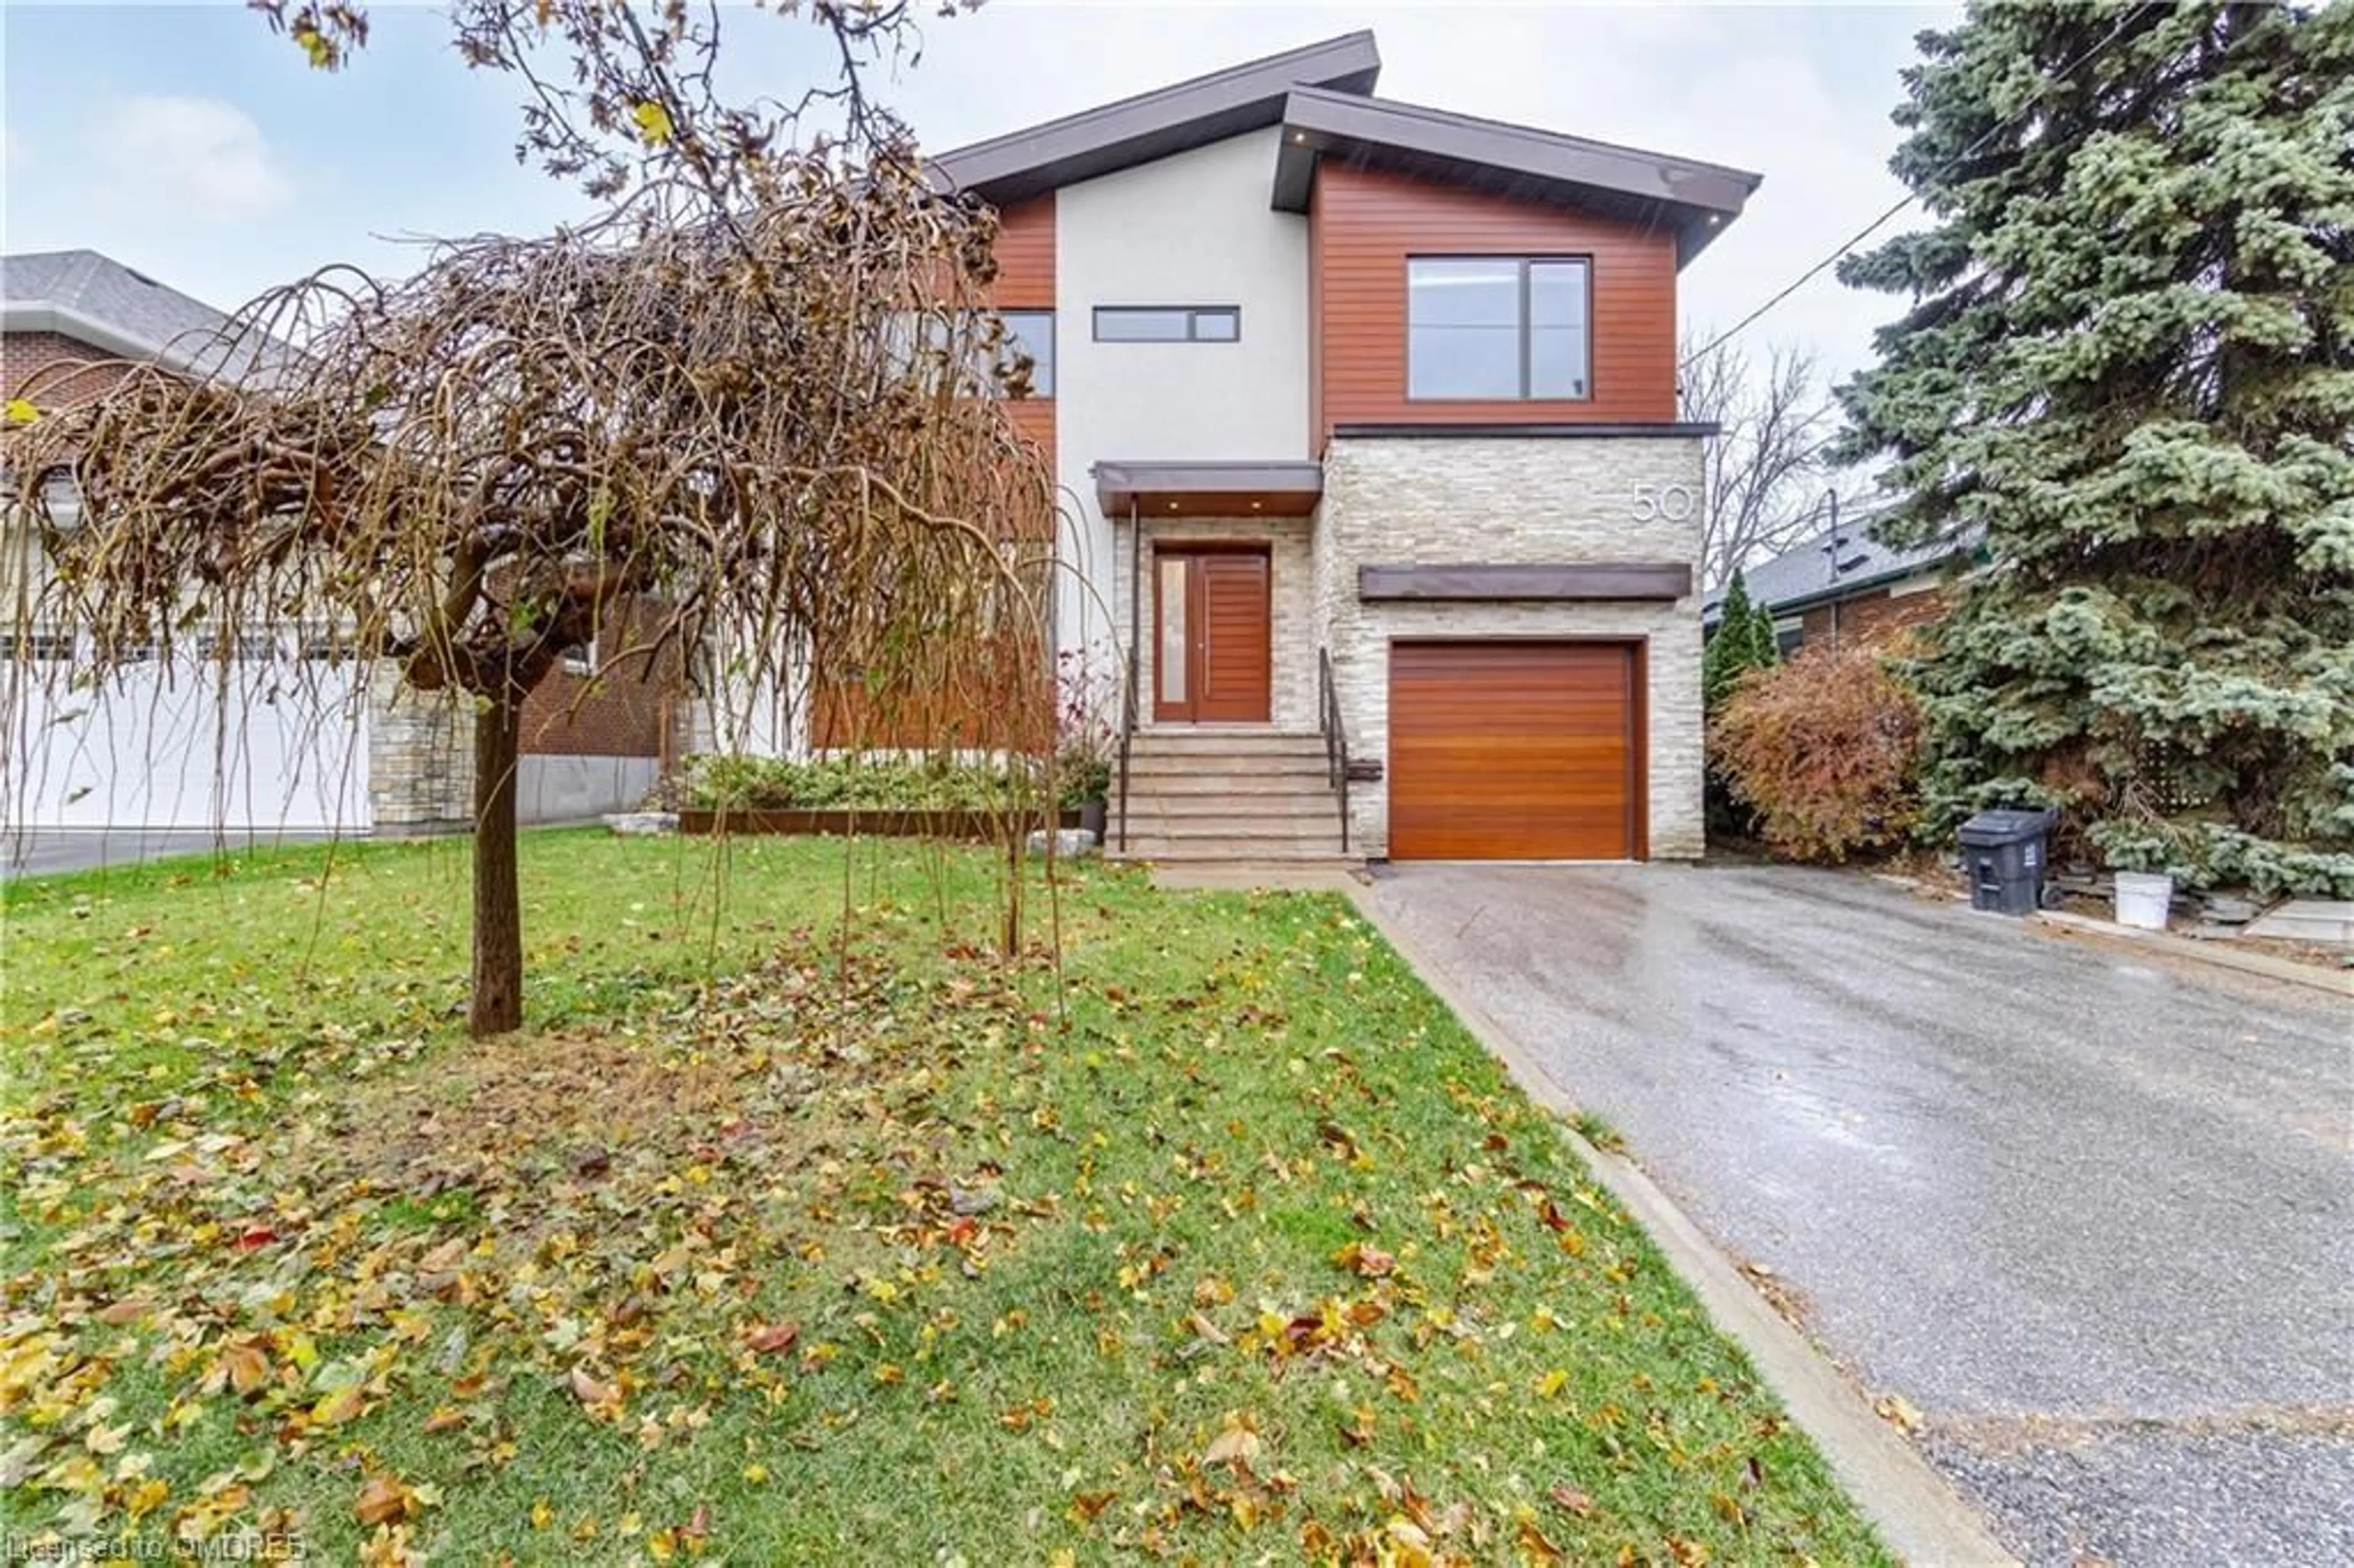 Home with brick exterior material for 50 Greenfield Dr, Toronto Ontario M9B 1H3